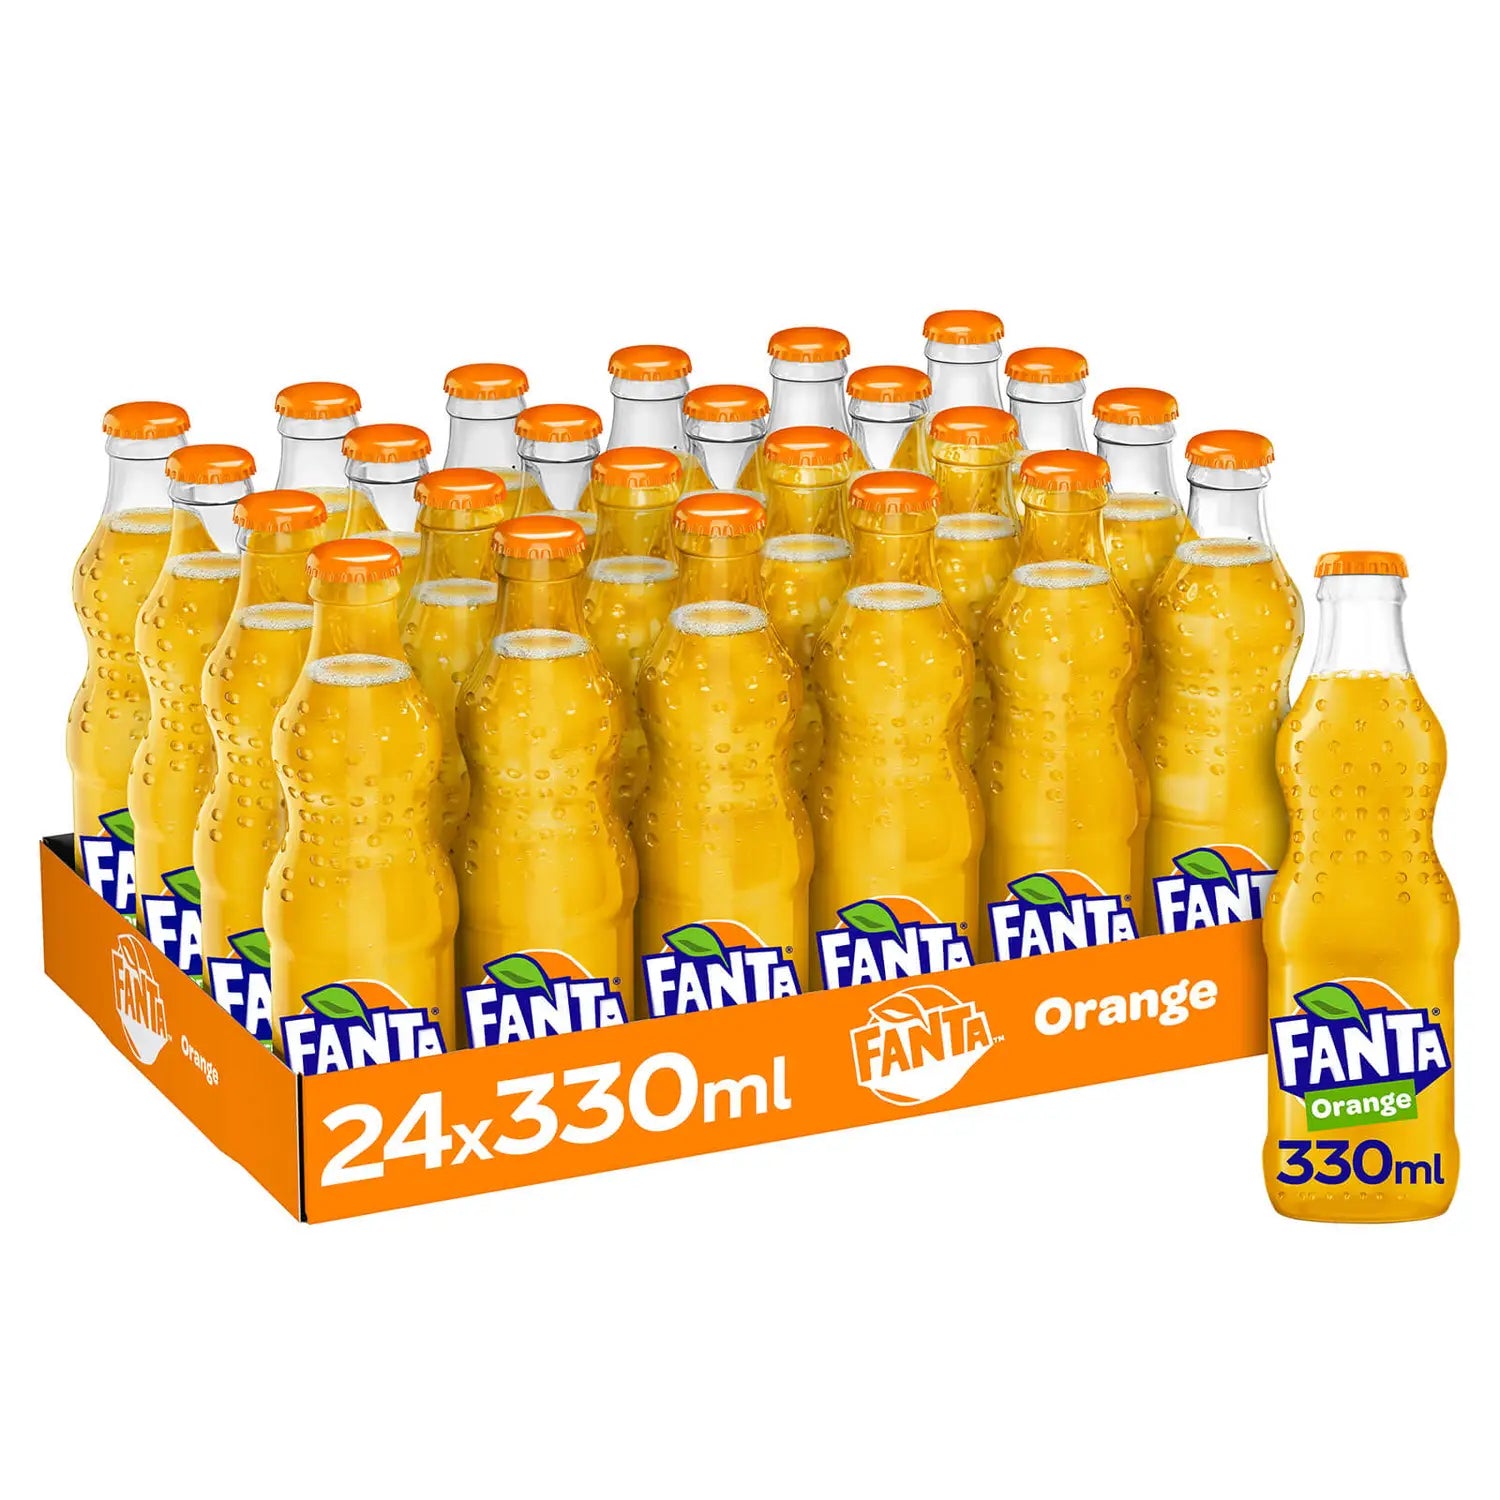 Fanta Orange Glass Bottles 24x330ml Nwt Fm Solutions Your Catering Wholesaler Nwt Fm Solutions